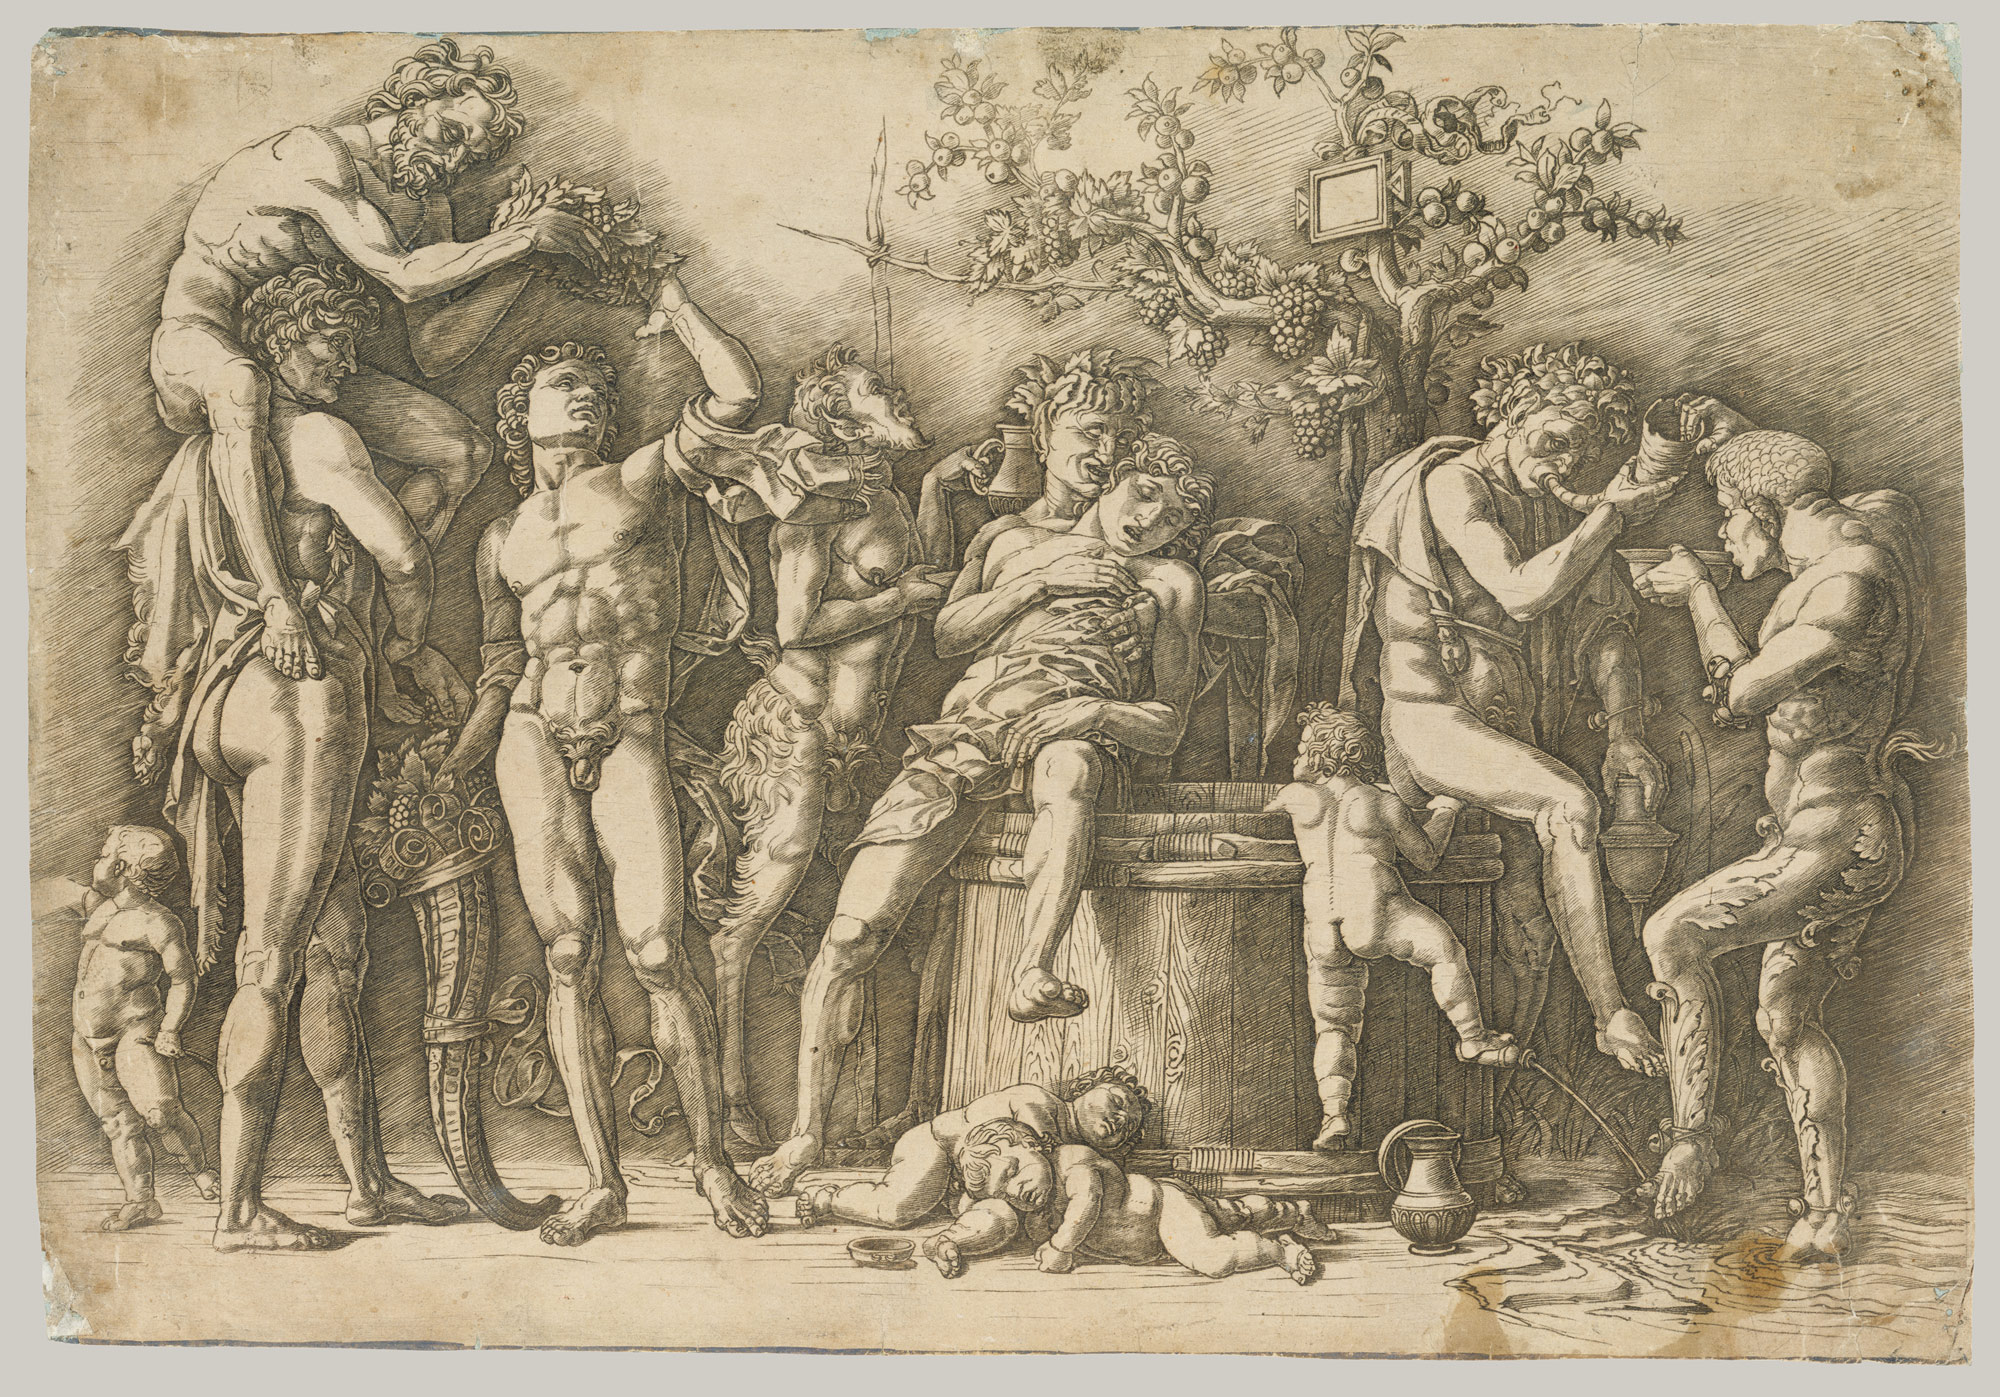 The definition of renaissance engraving, Bacchanal festival from 1473. 